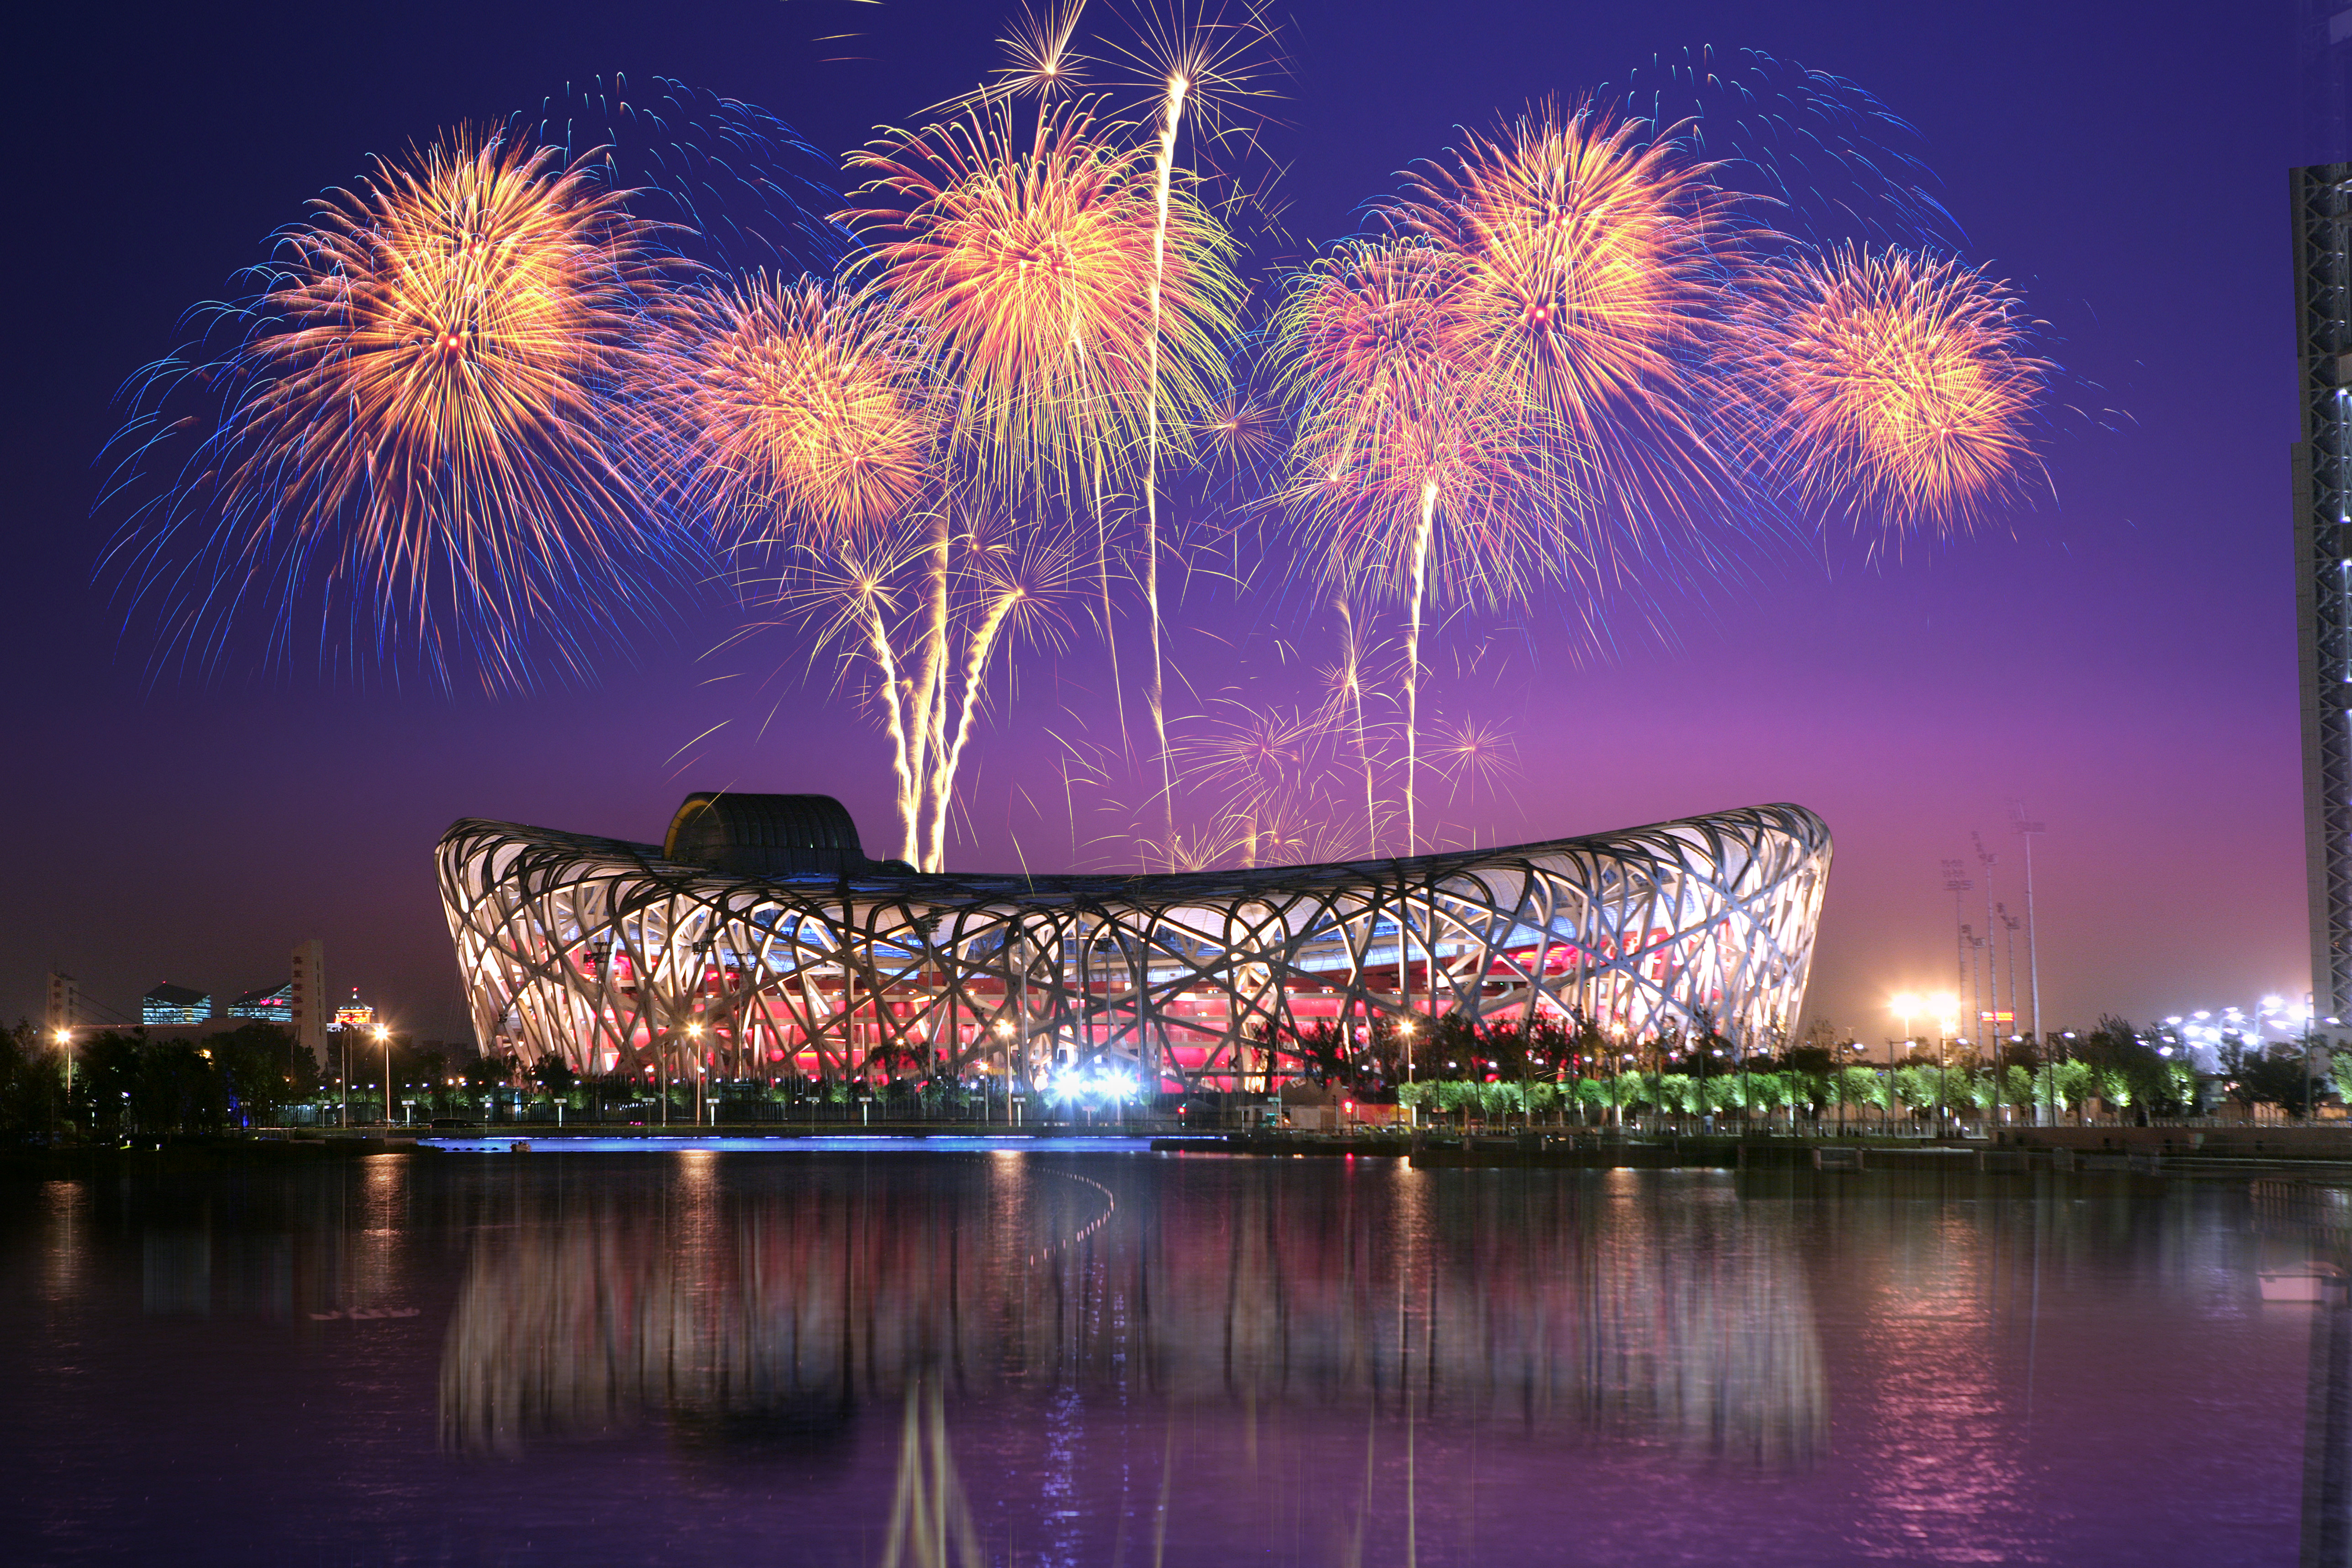 Fireworks over the "Bird's Nest" in China